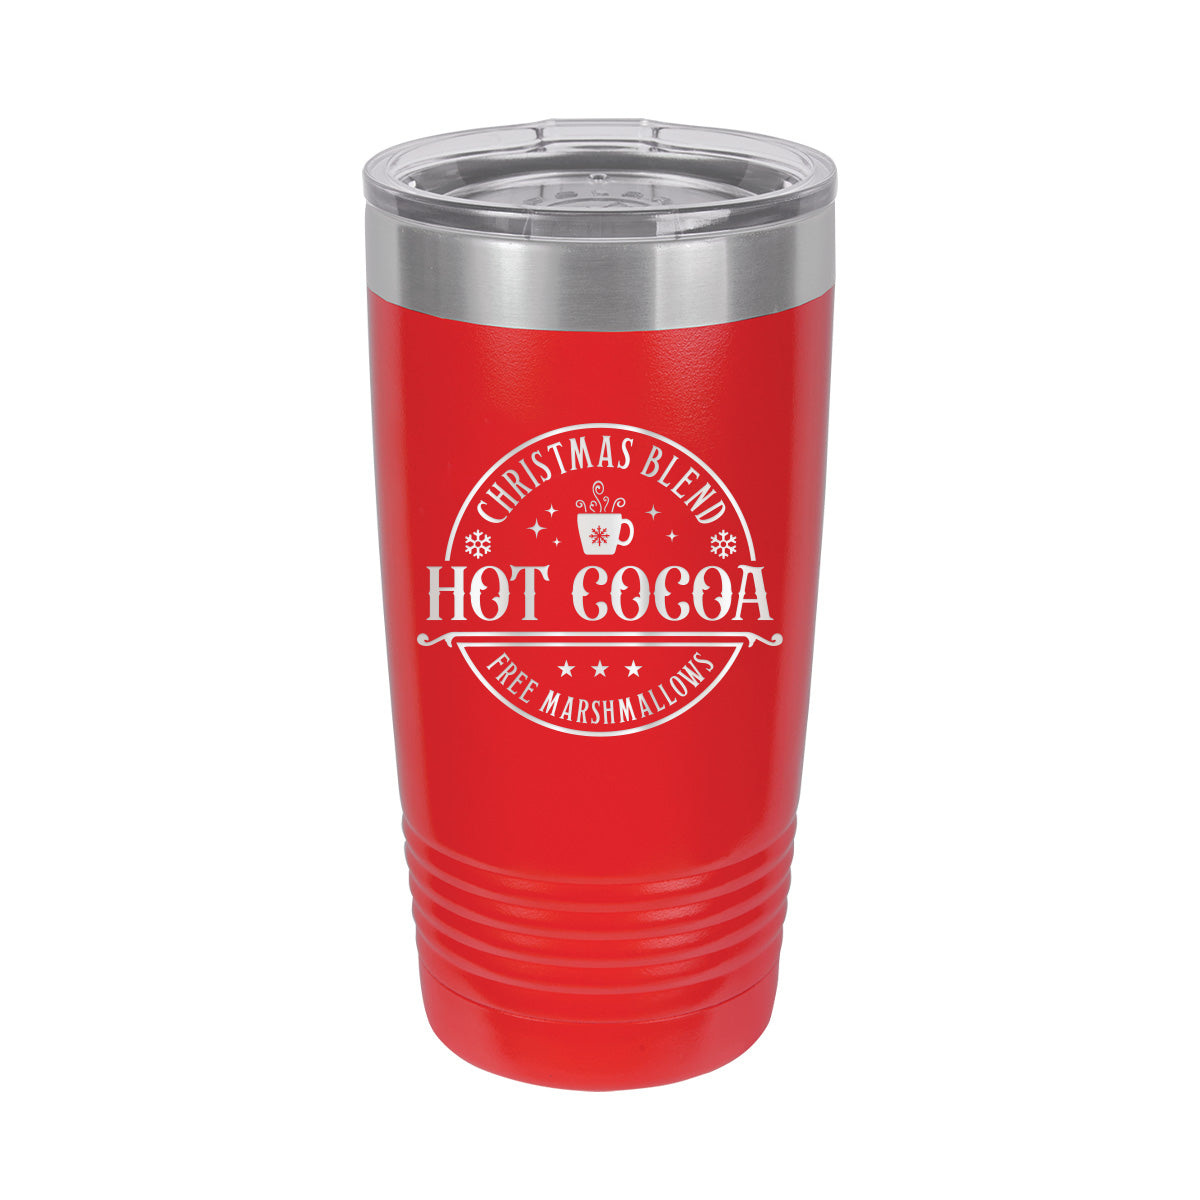 Keep your drink hot for 7 hours with these tumblers